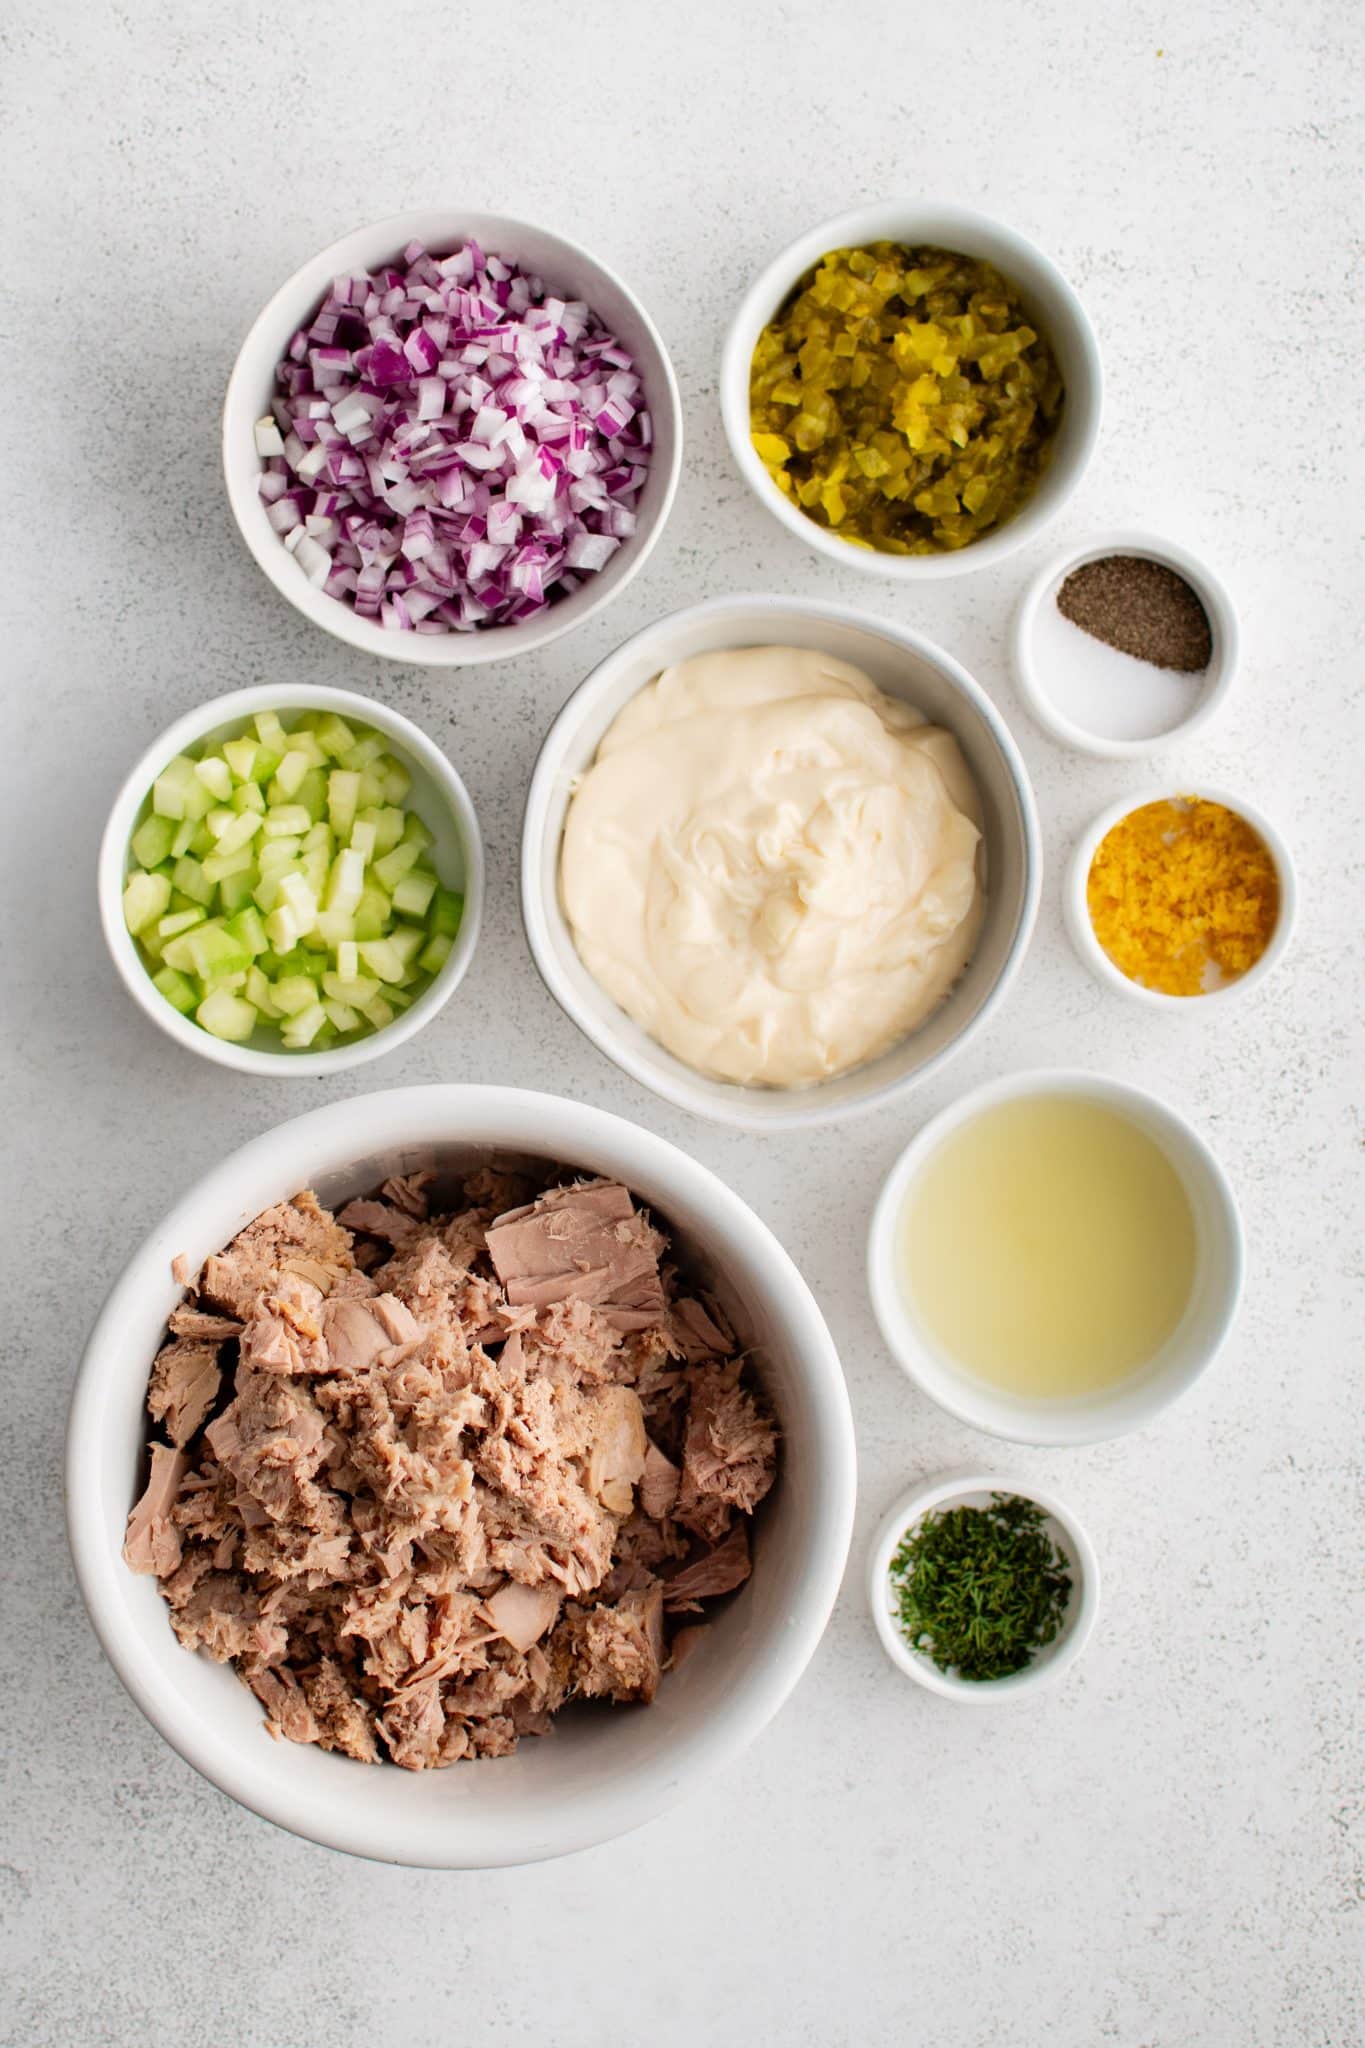 All of the ingredients for Tuna Salad presented in individual measuring cups and ramekins.